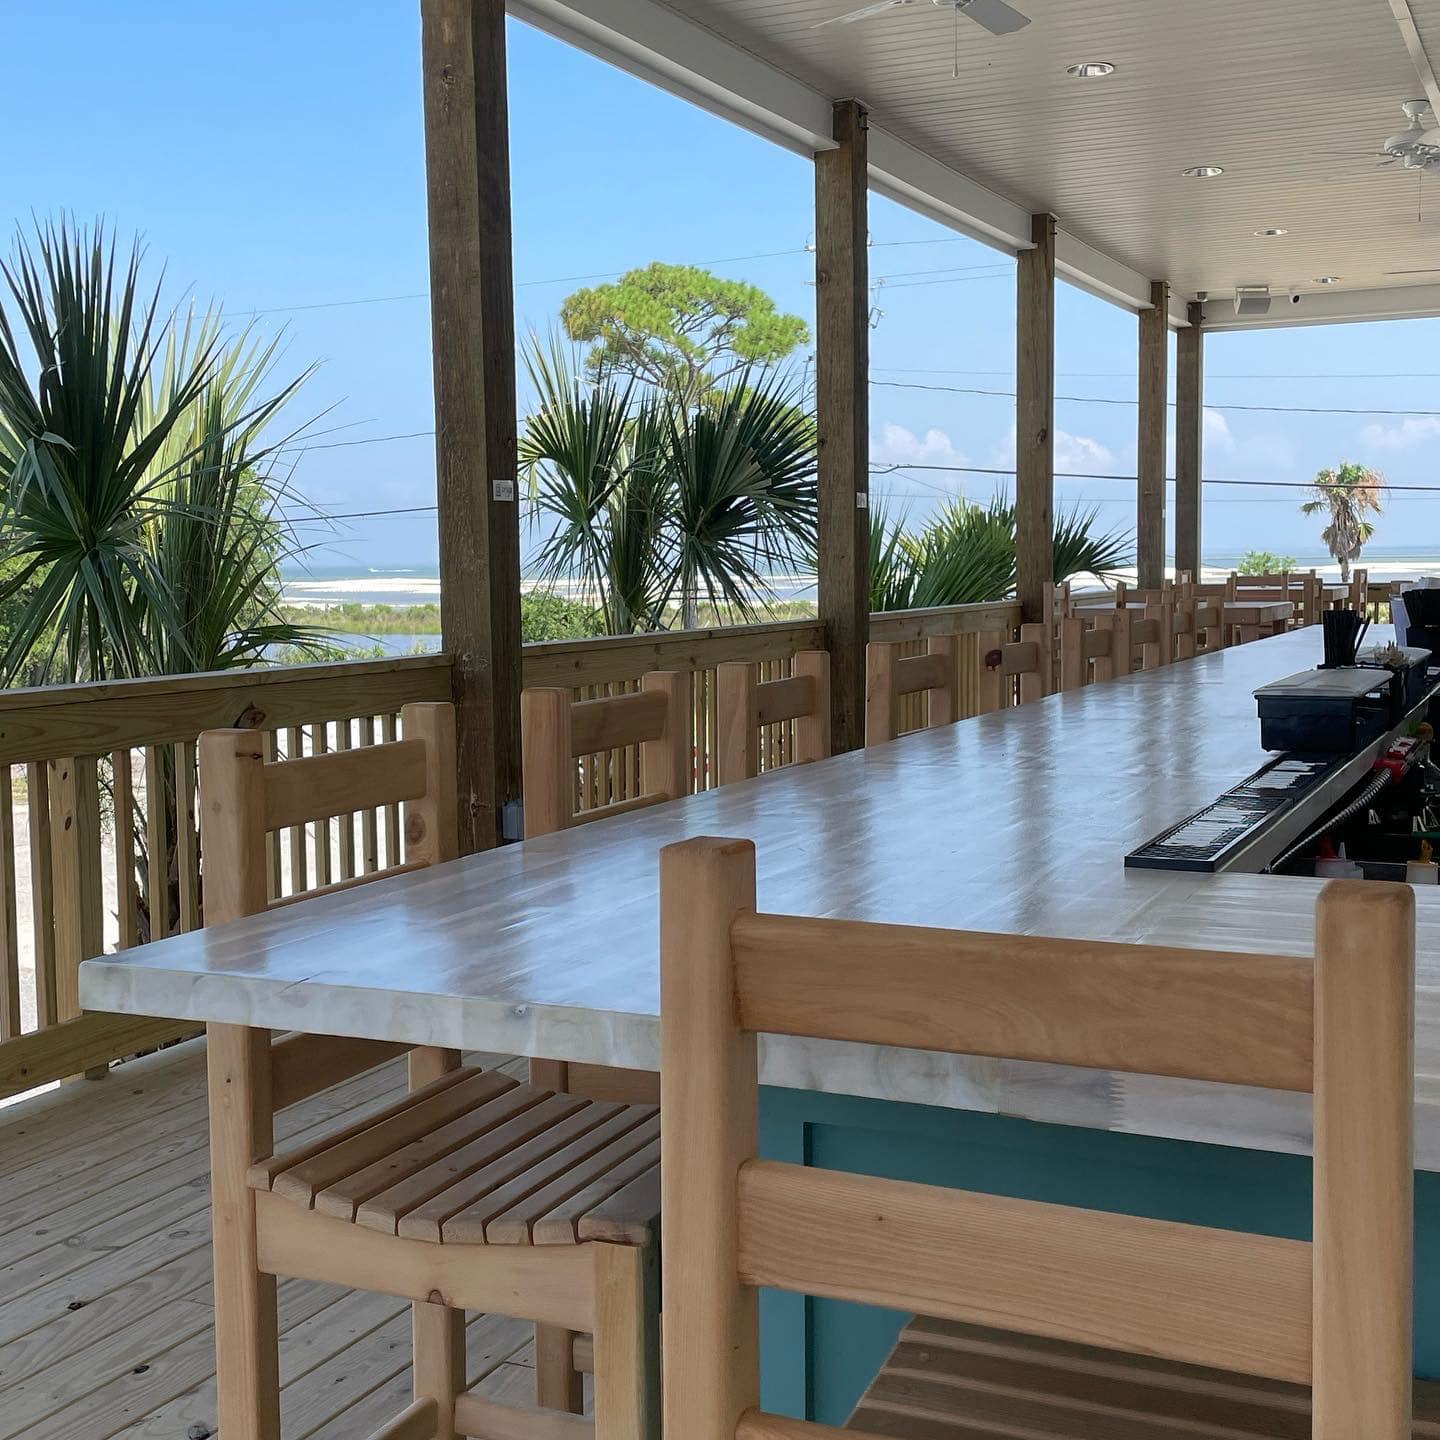 Pet Friendly The Carriage Wine and Market: Dauphin Island